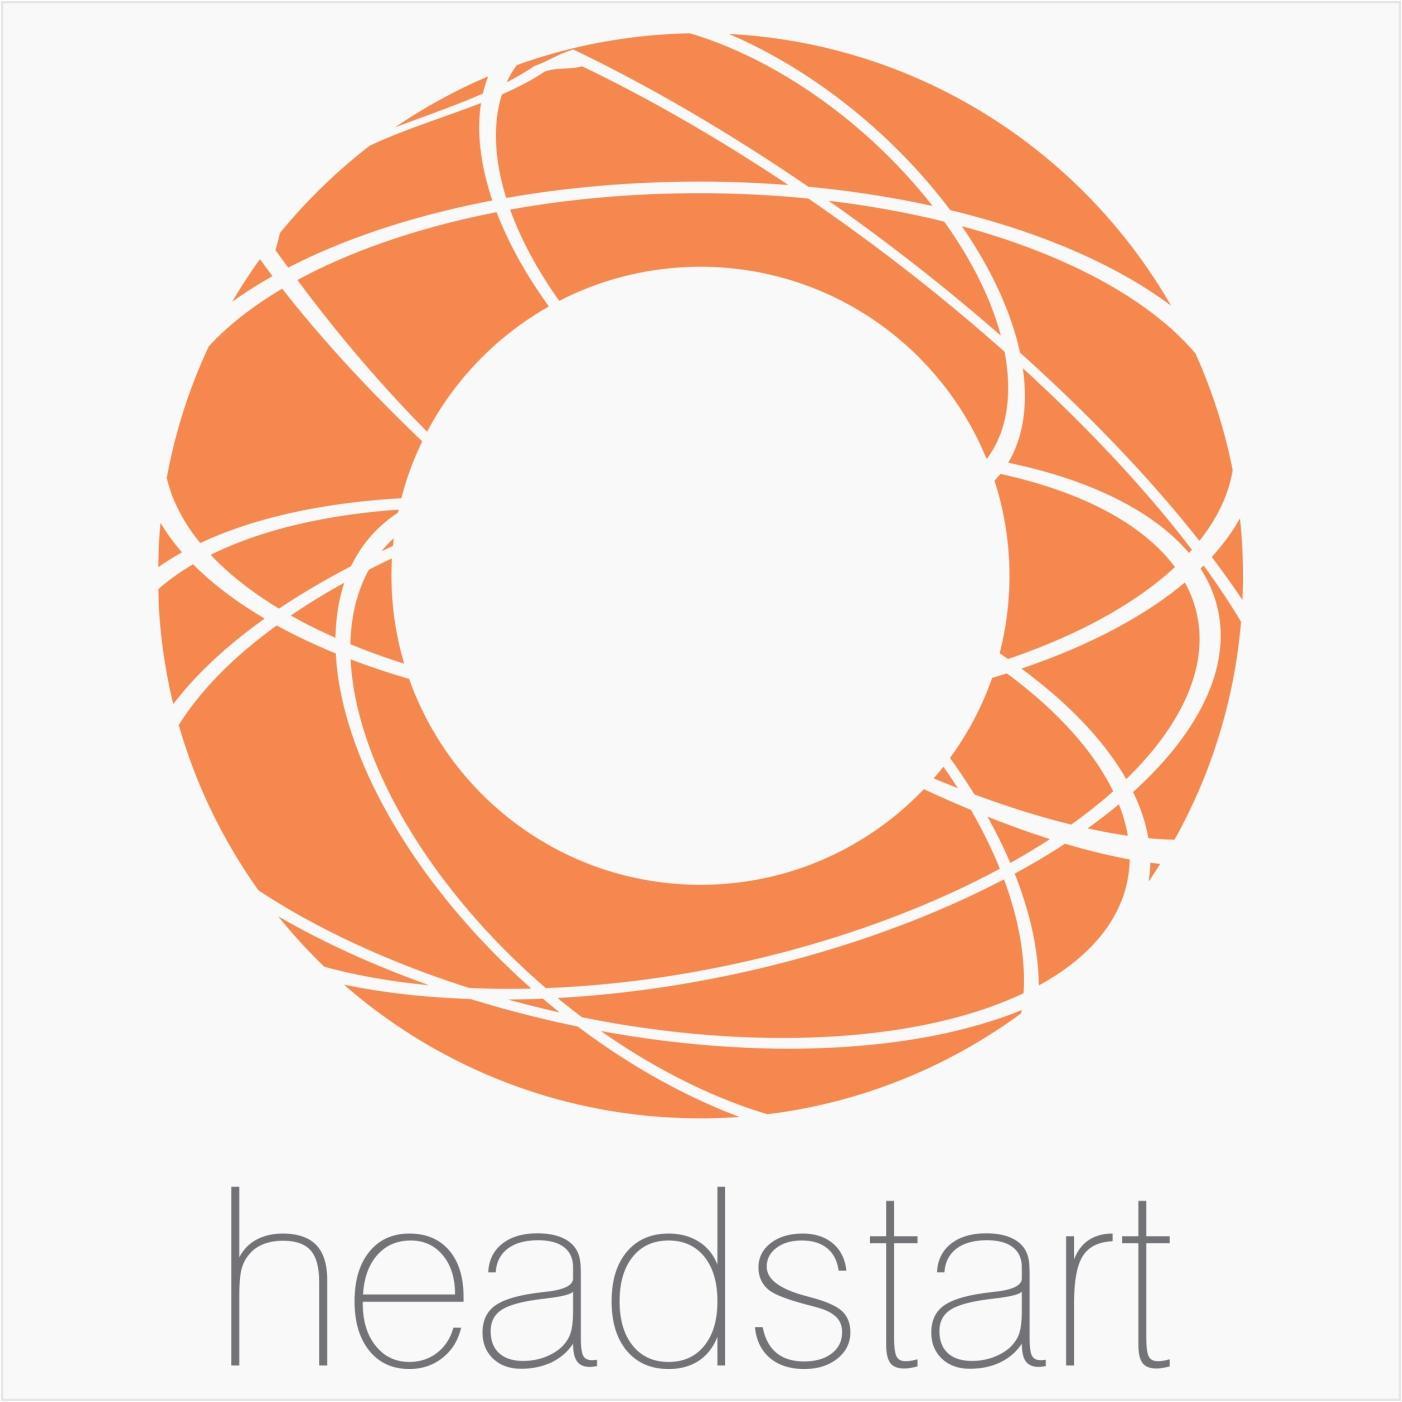 Headstart is a strategy and innovation company. Magic(at)madeinheadstart(dot)net